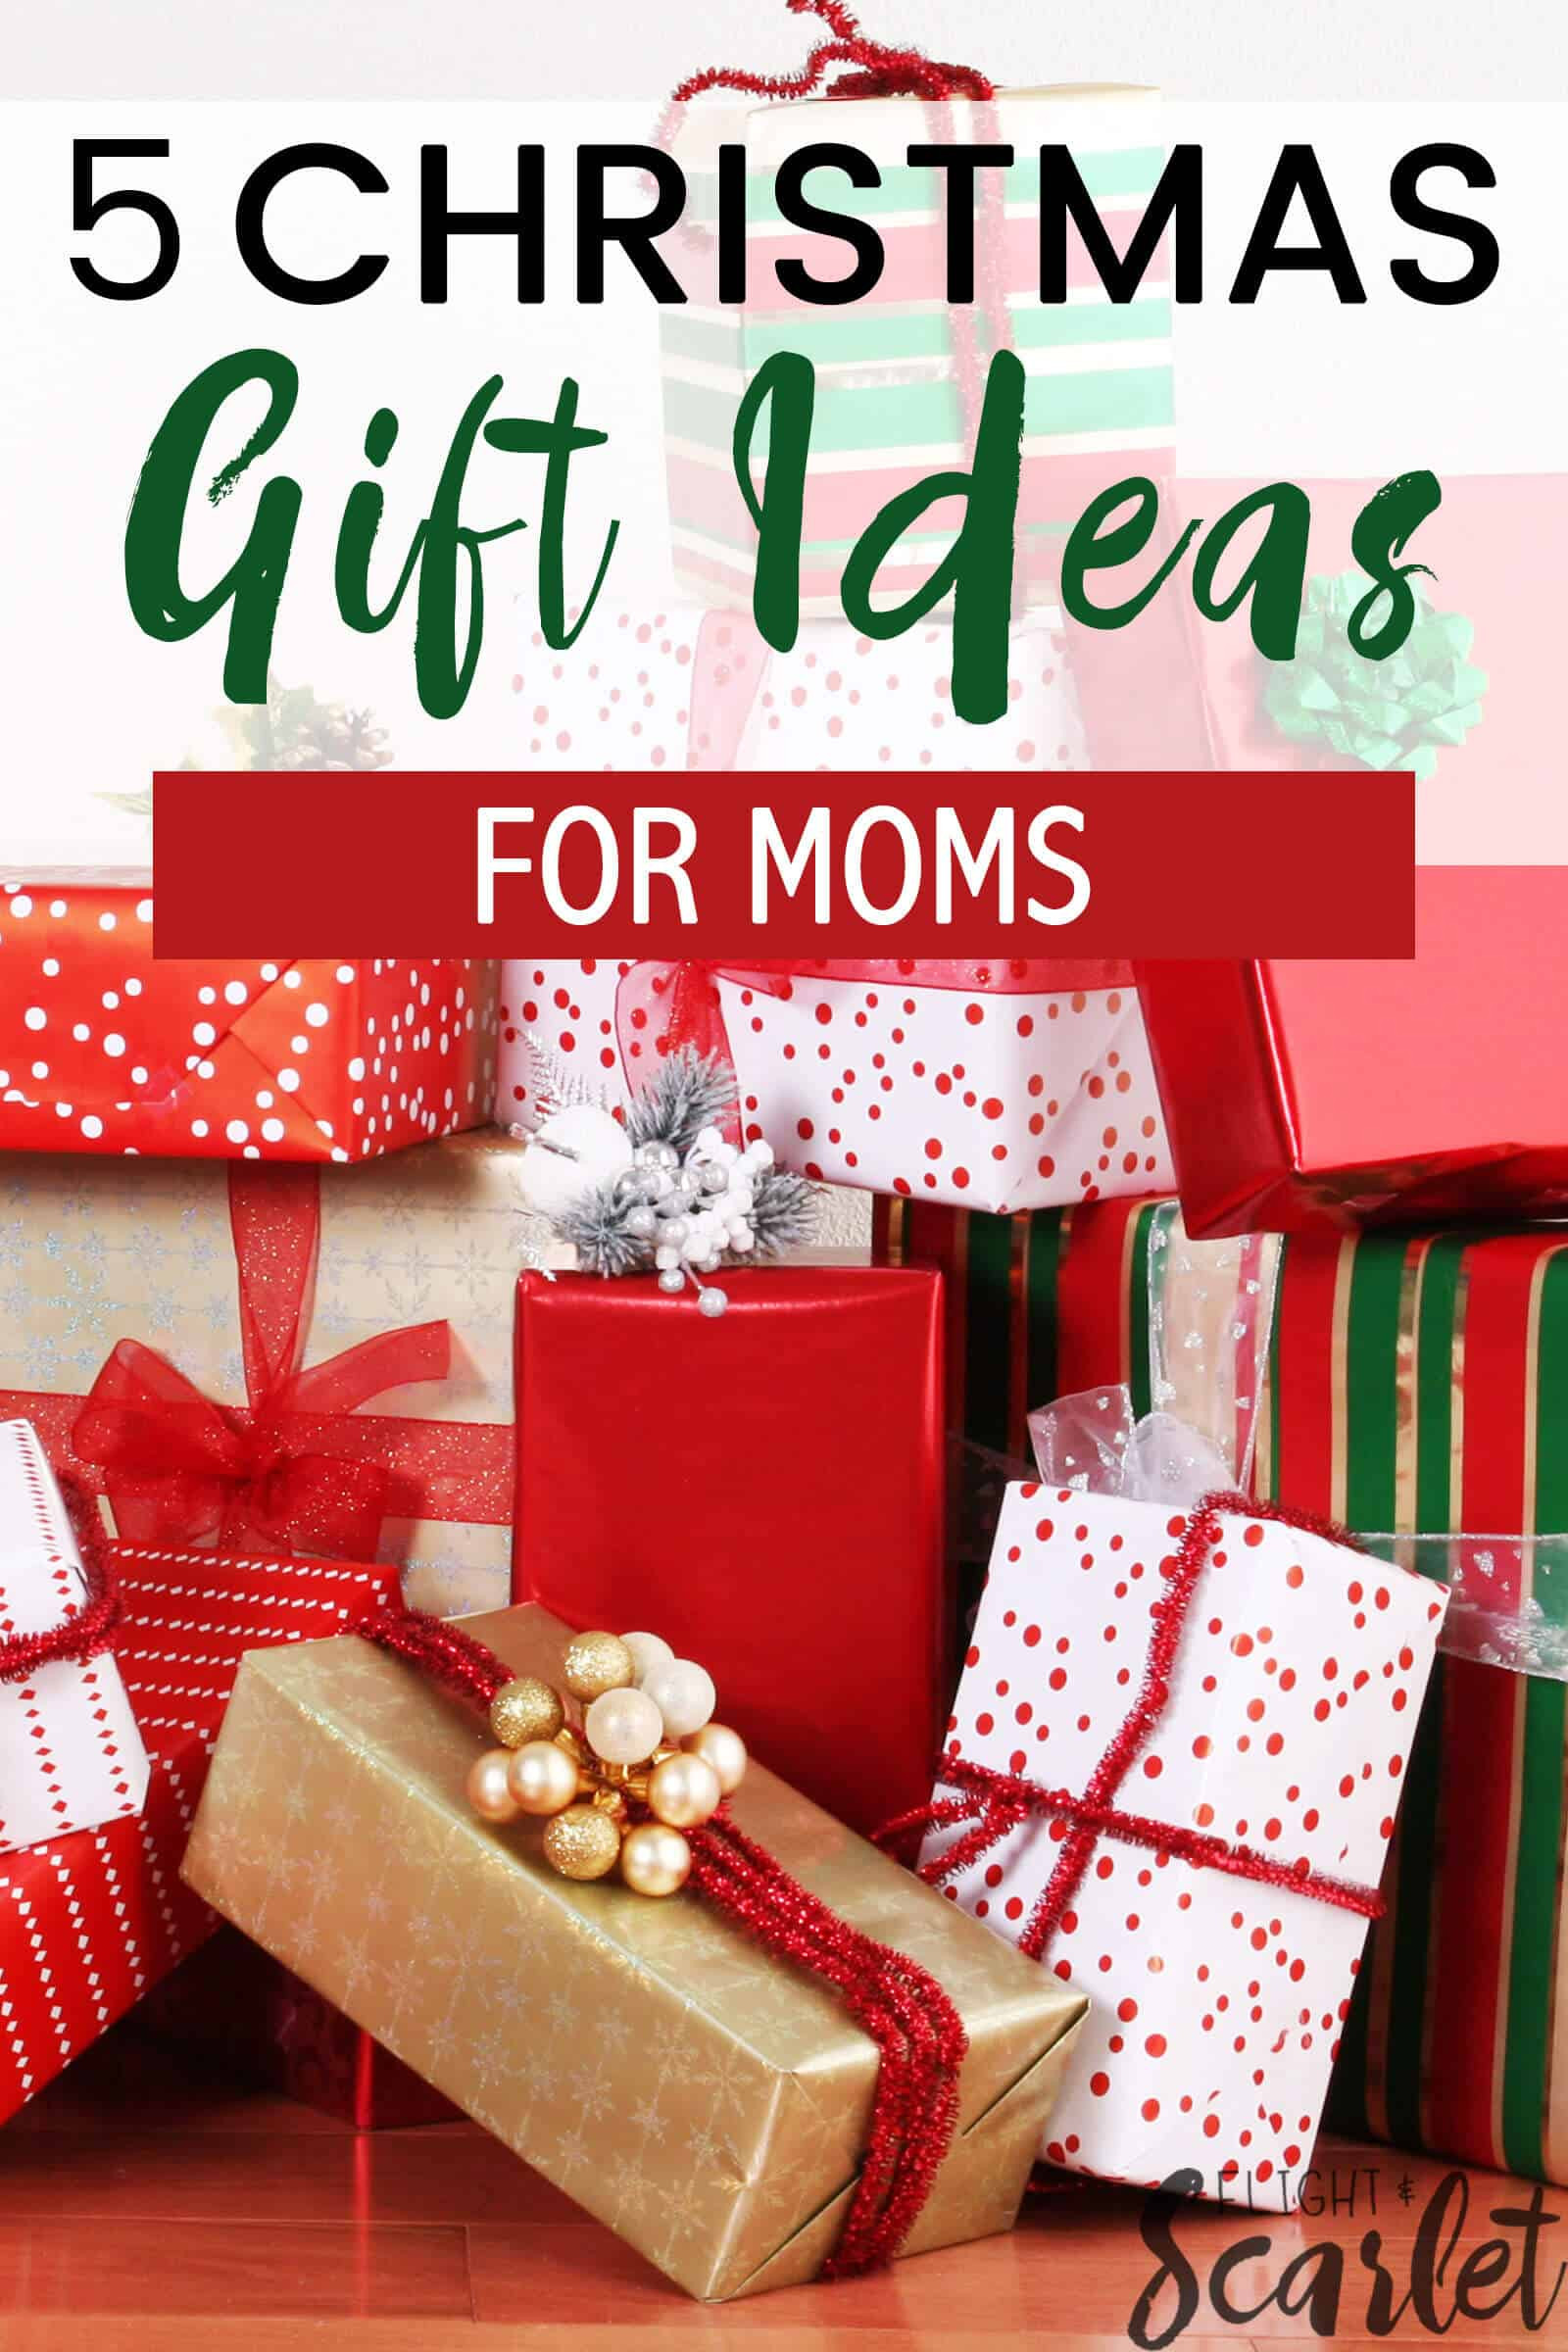 Christmas Gift For Mum Who Has Everything
 5 Bud Friendly Gift Ideas For Moms Flight & Scarlet